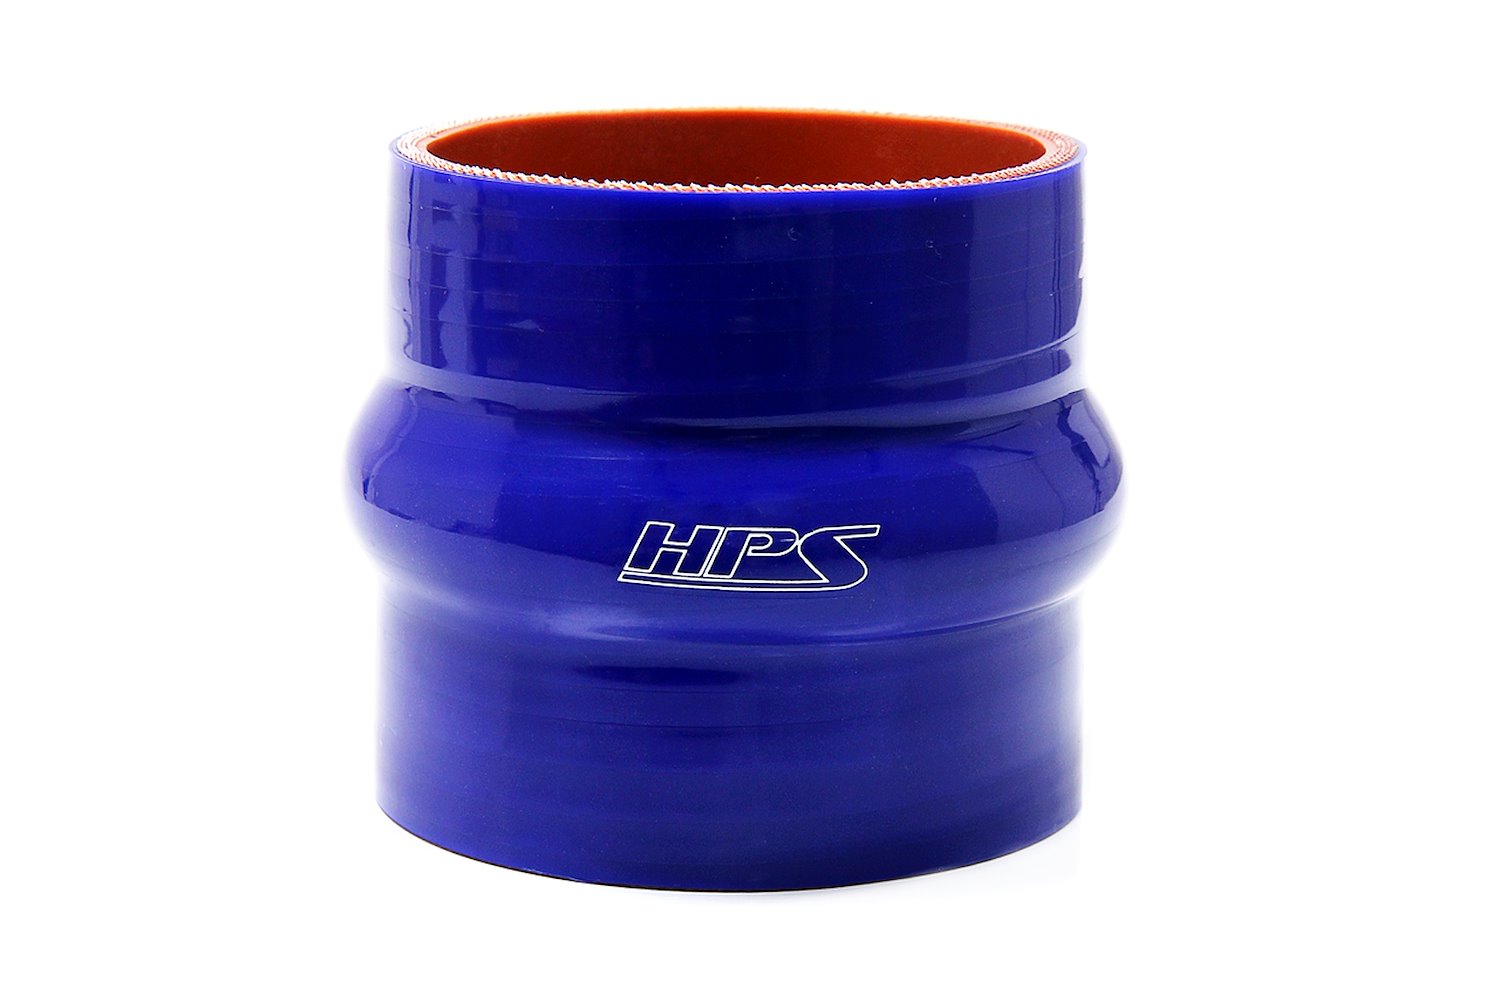 HTSHC-100-L6-BLUE Silicone Hump Coupler Hose, High-Temp 4-Ply Reinforced, 1 in. ID, 6 in. Long, Blue